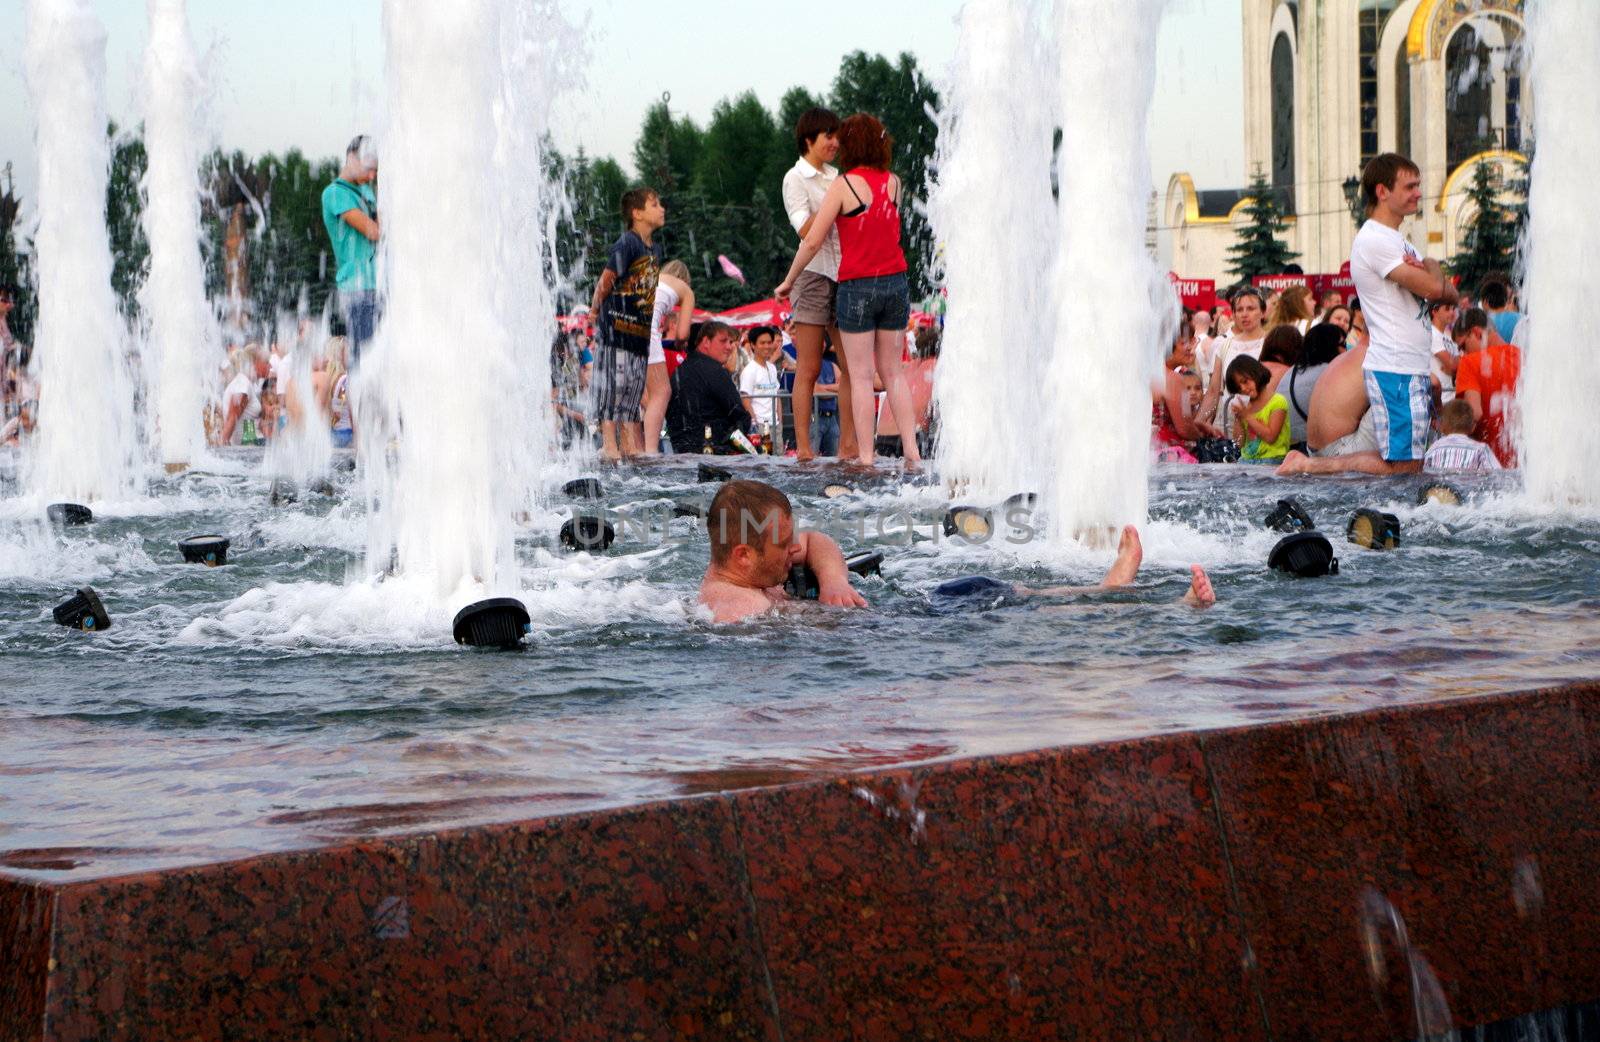 Moscow, Russia - June 26, 2010: Summer day. Peoples have fun in youth day celebration on June 26, 2010 at victory park in Moscow, Russia by Stoyanov